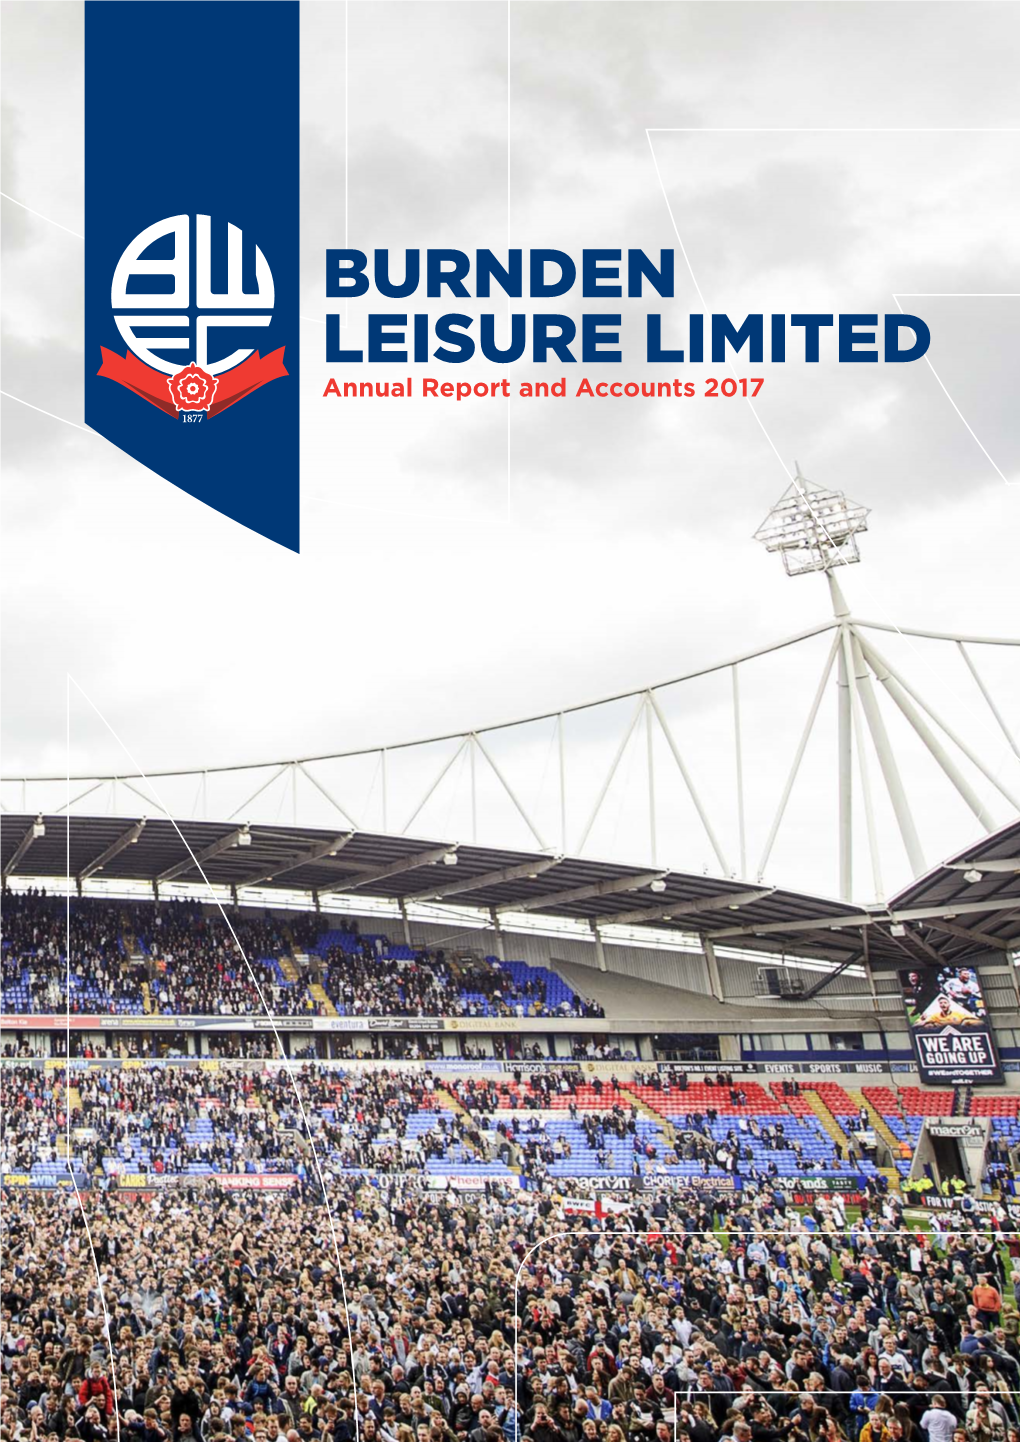 BURNDEN LEISURE LIMITED Annual Report and Accounts 2017 BURNDEN LEISURE LIMITED Annual Report and Accounts 2017